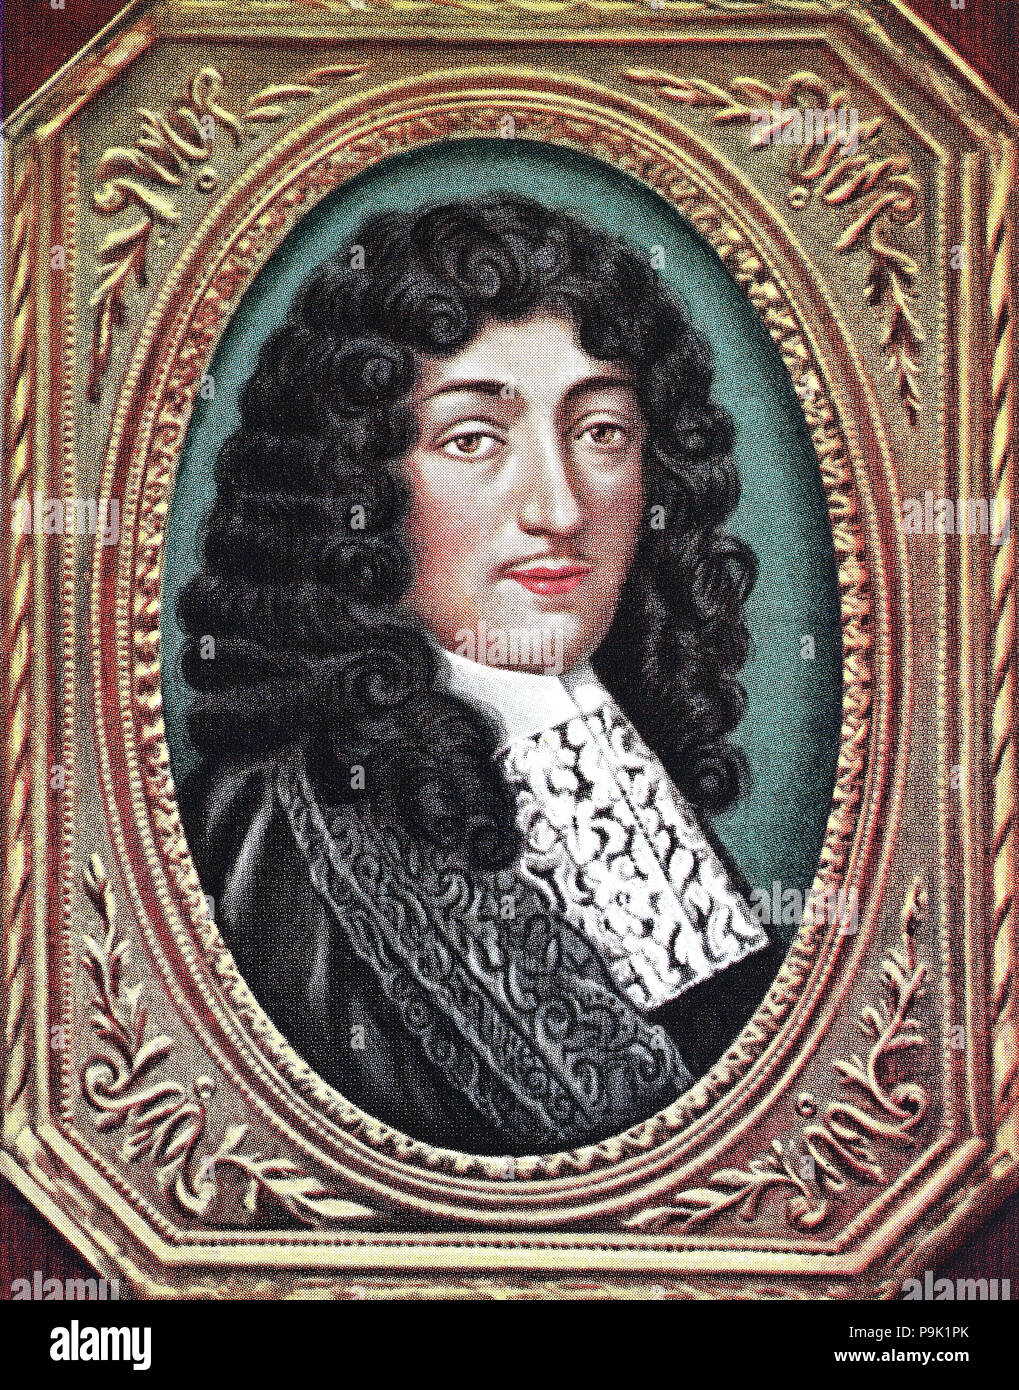 Jean-Baptiste Antoine Colbert, Marquis de Seignelay, 1 November 1651 â€“ 3 November 1690, was a French politician, digital improved reproduction of an original print from the year 1900 Stock Photo